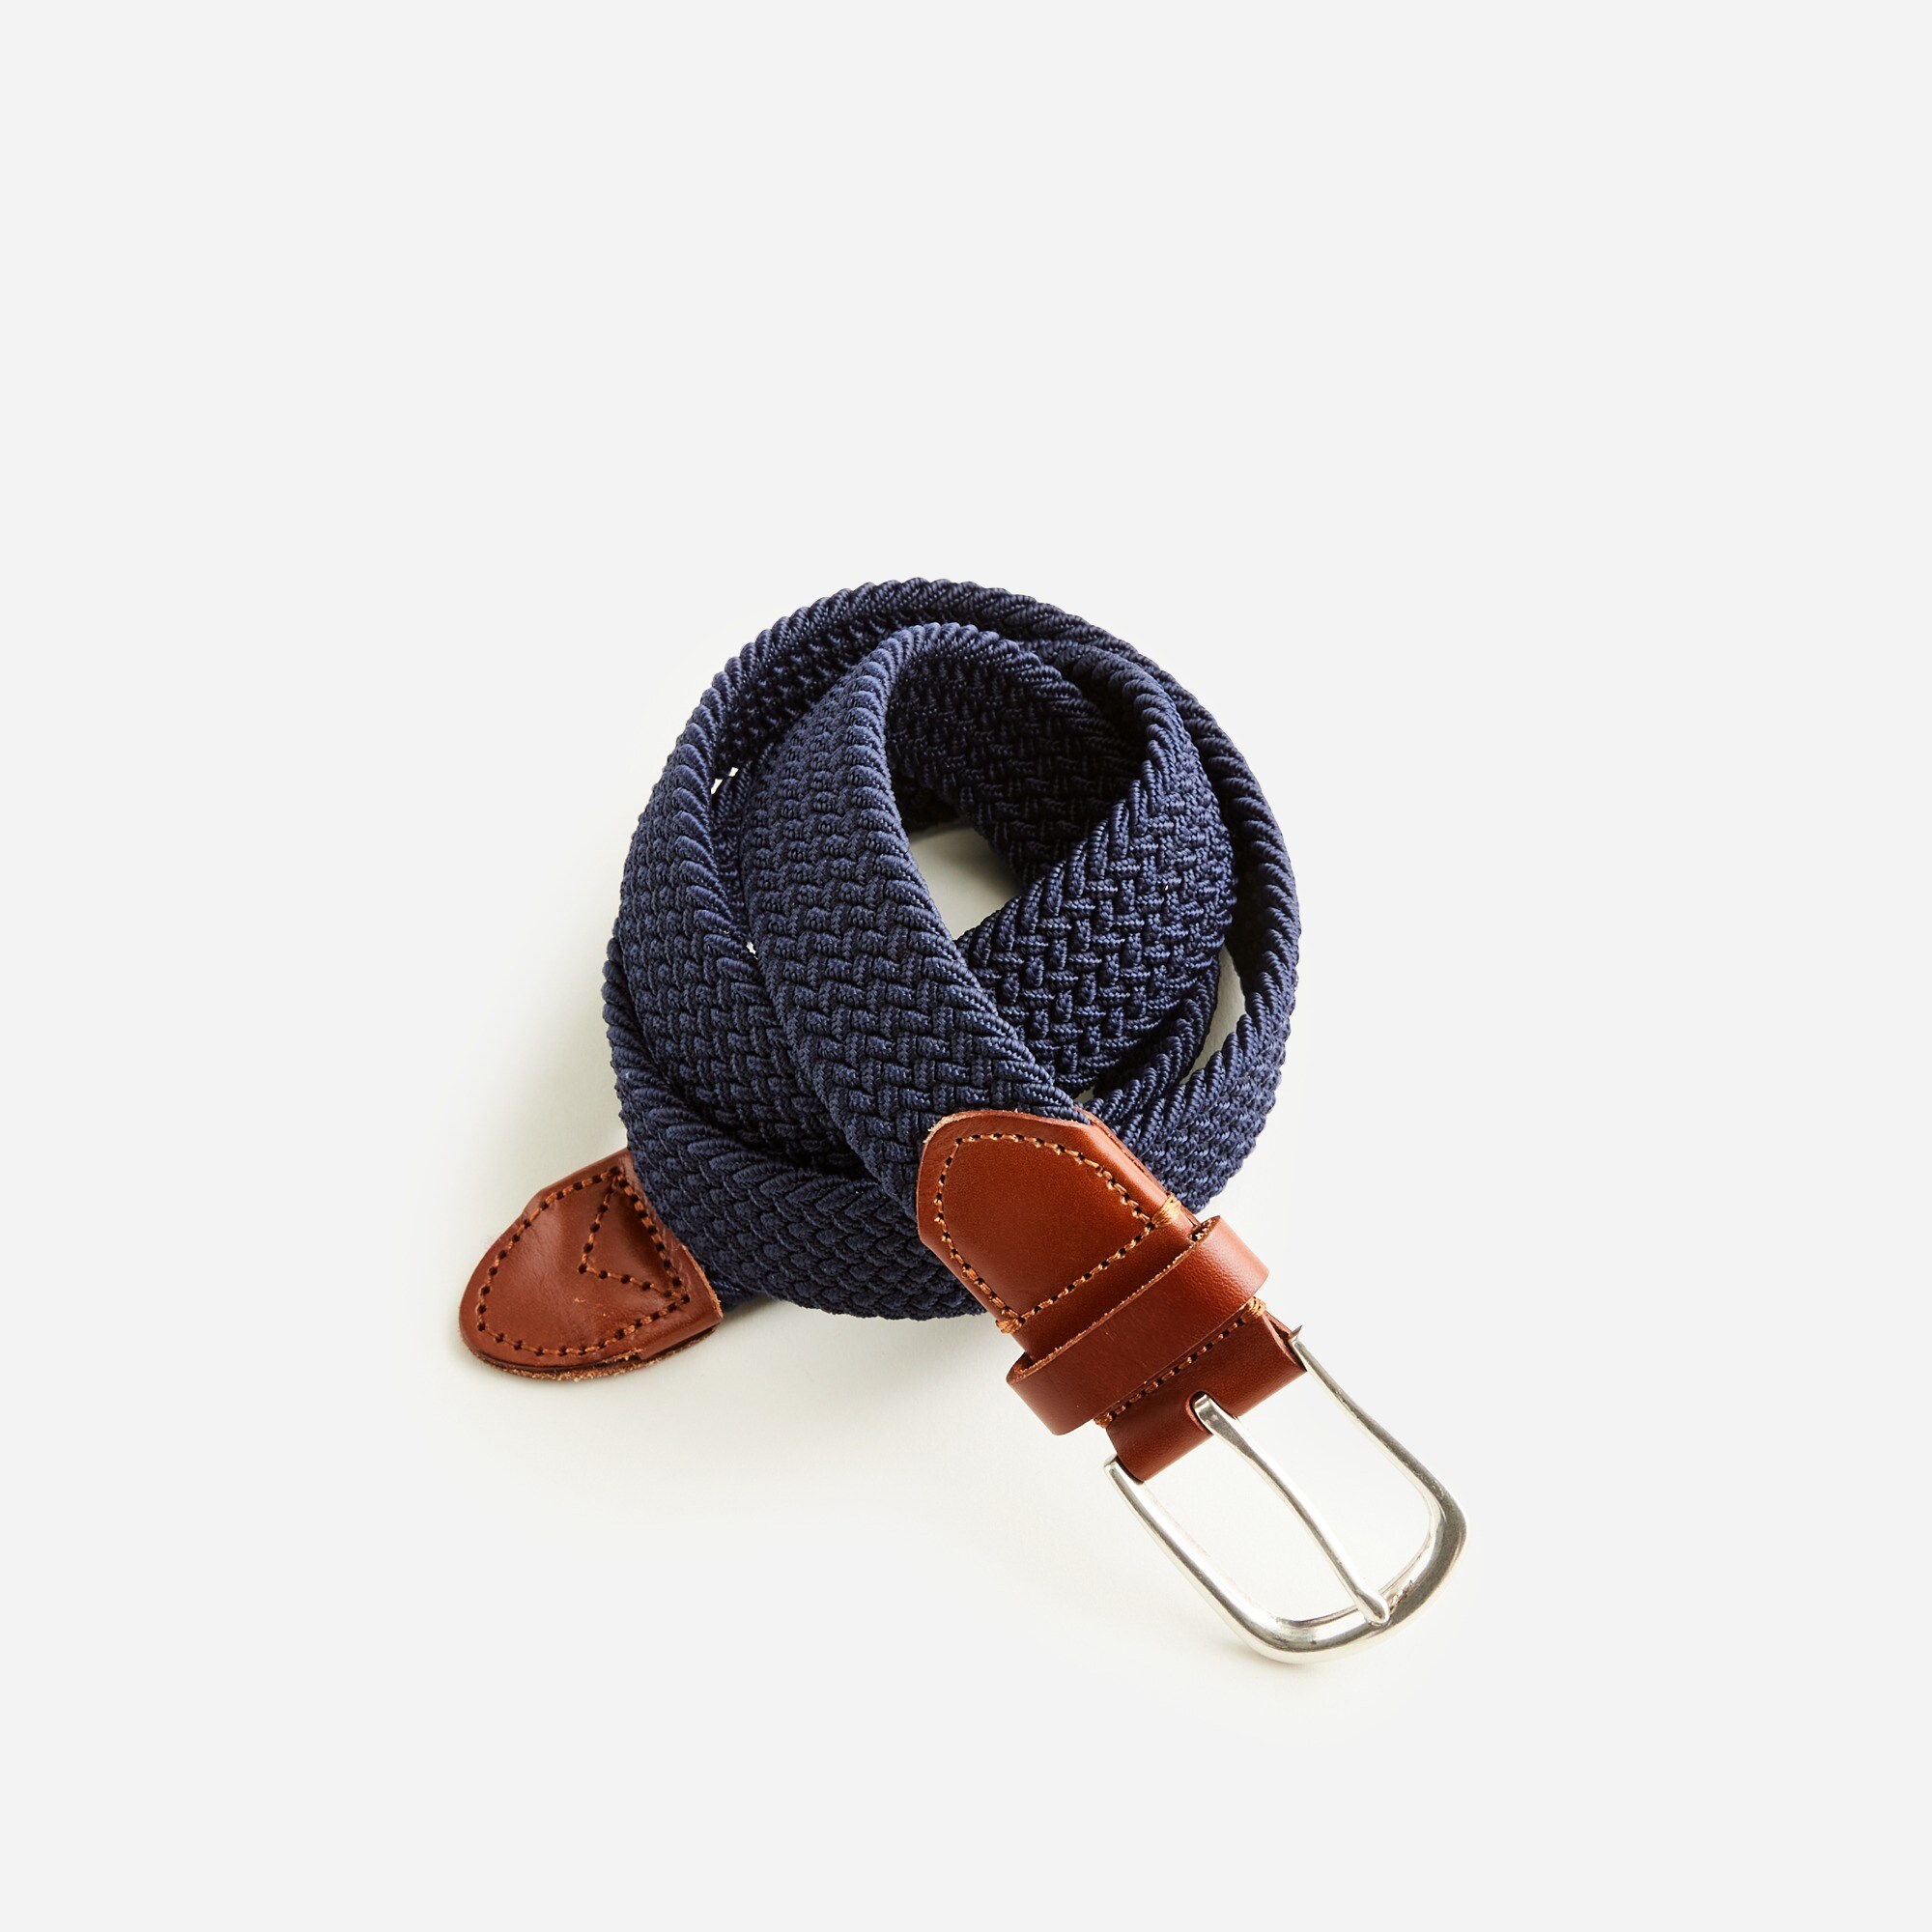  Woven elastic belt with round buckle